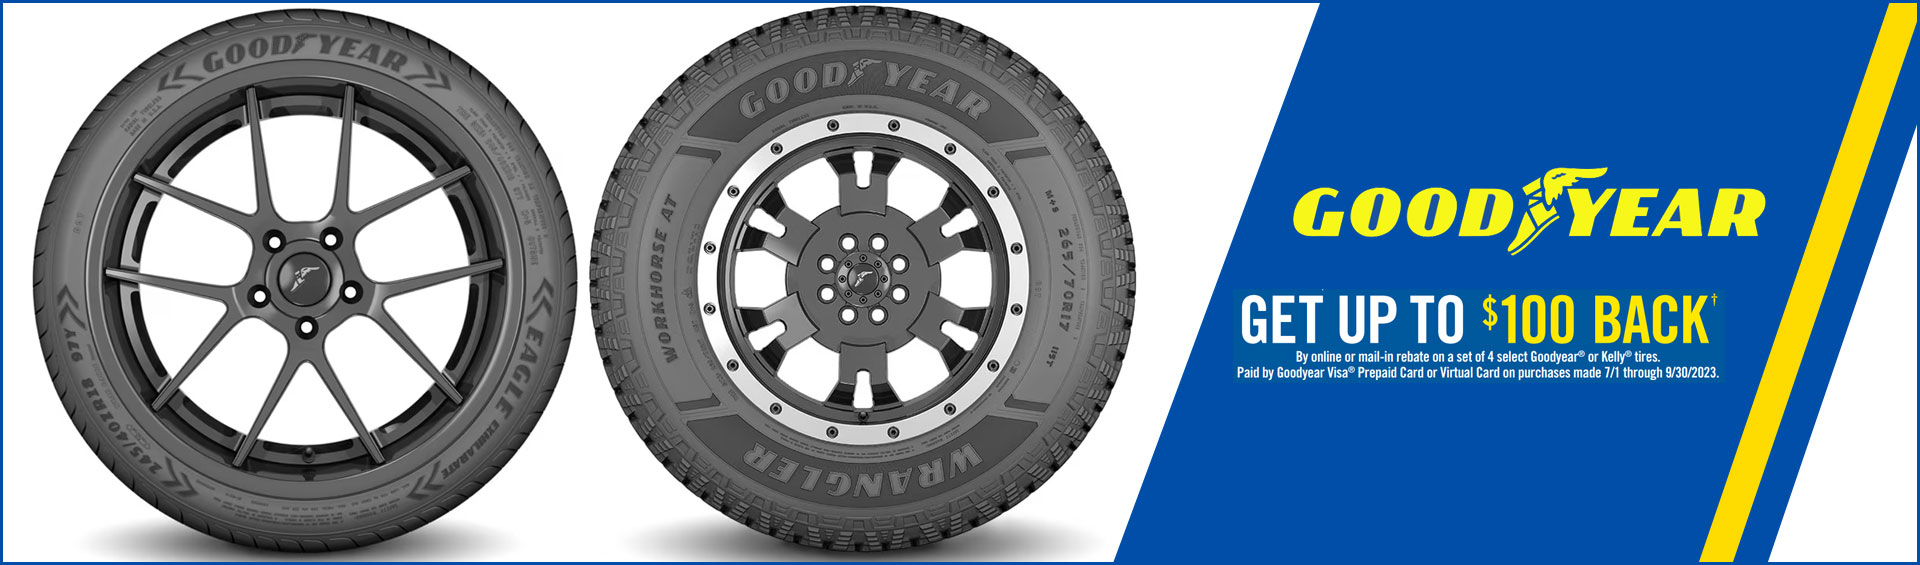 GET UP TO $100 in Rebates From Goodyear Tires!